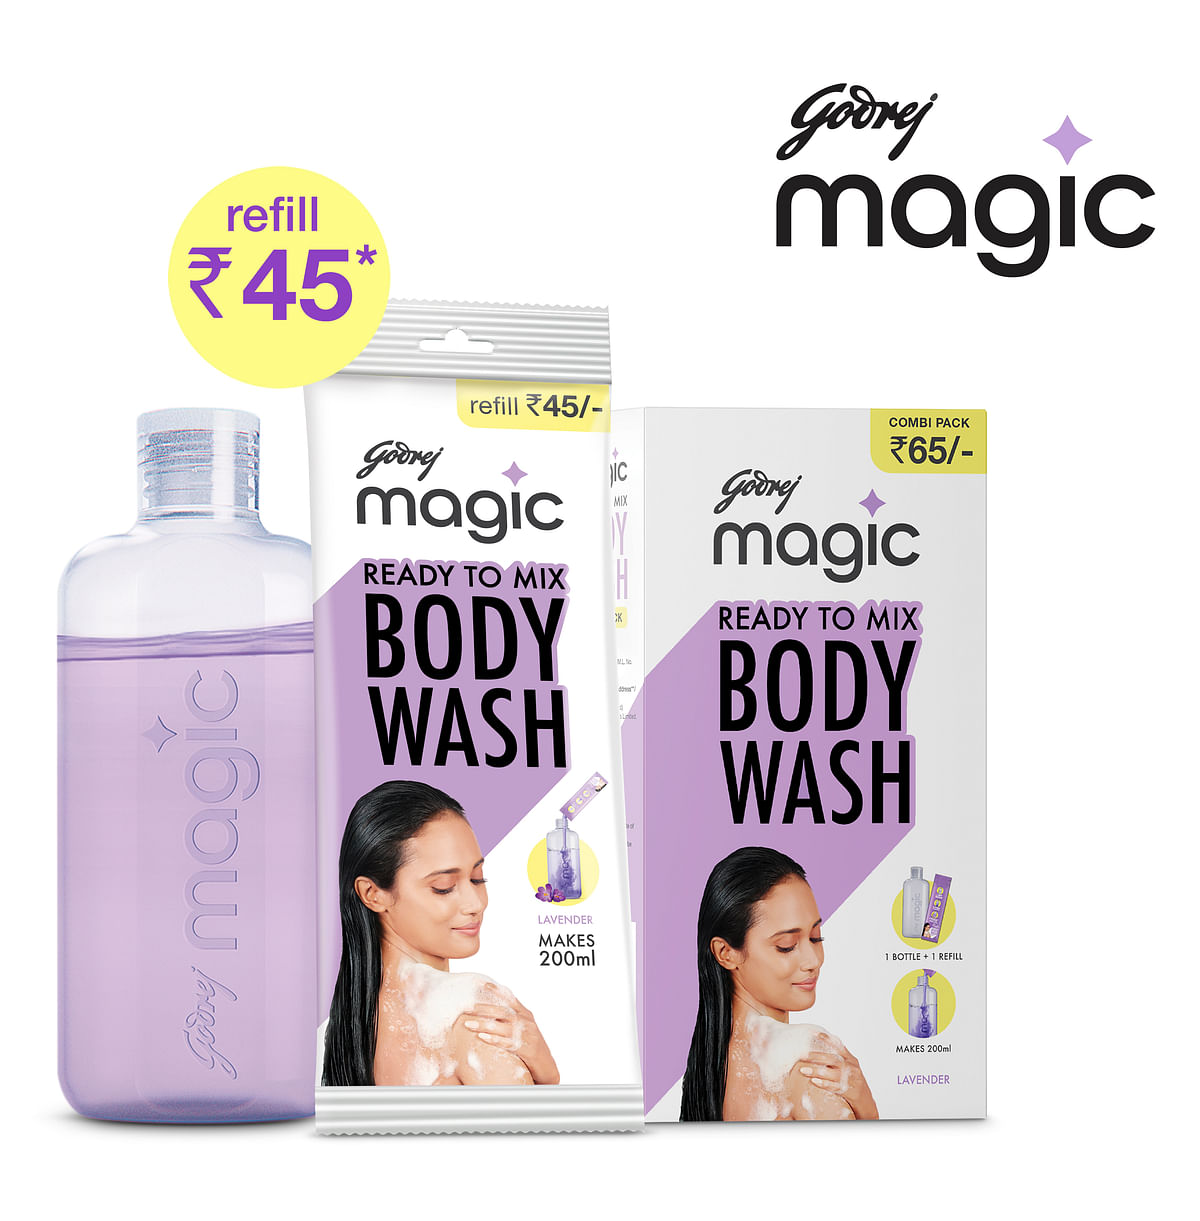 With Godrej Magic body wash, GCPL brings sustainability to the masses 